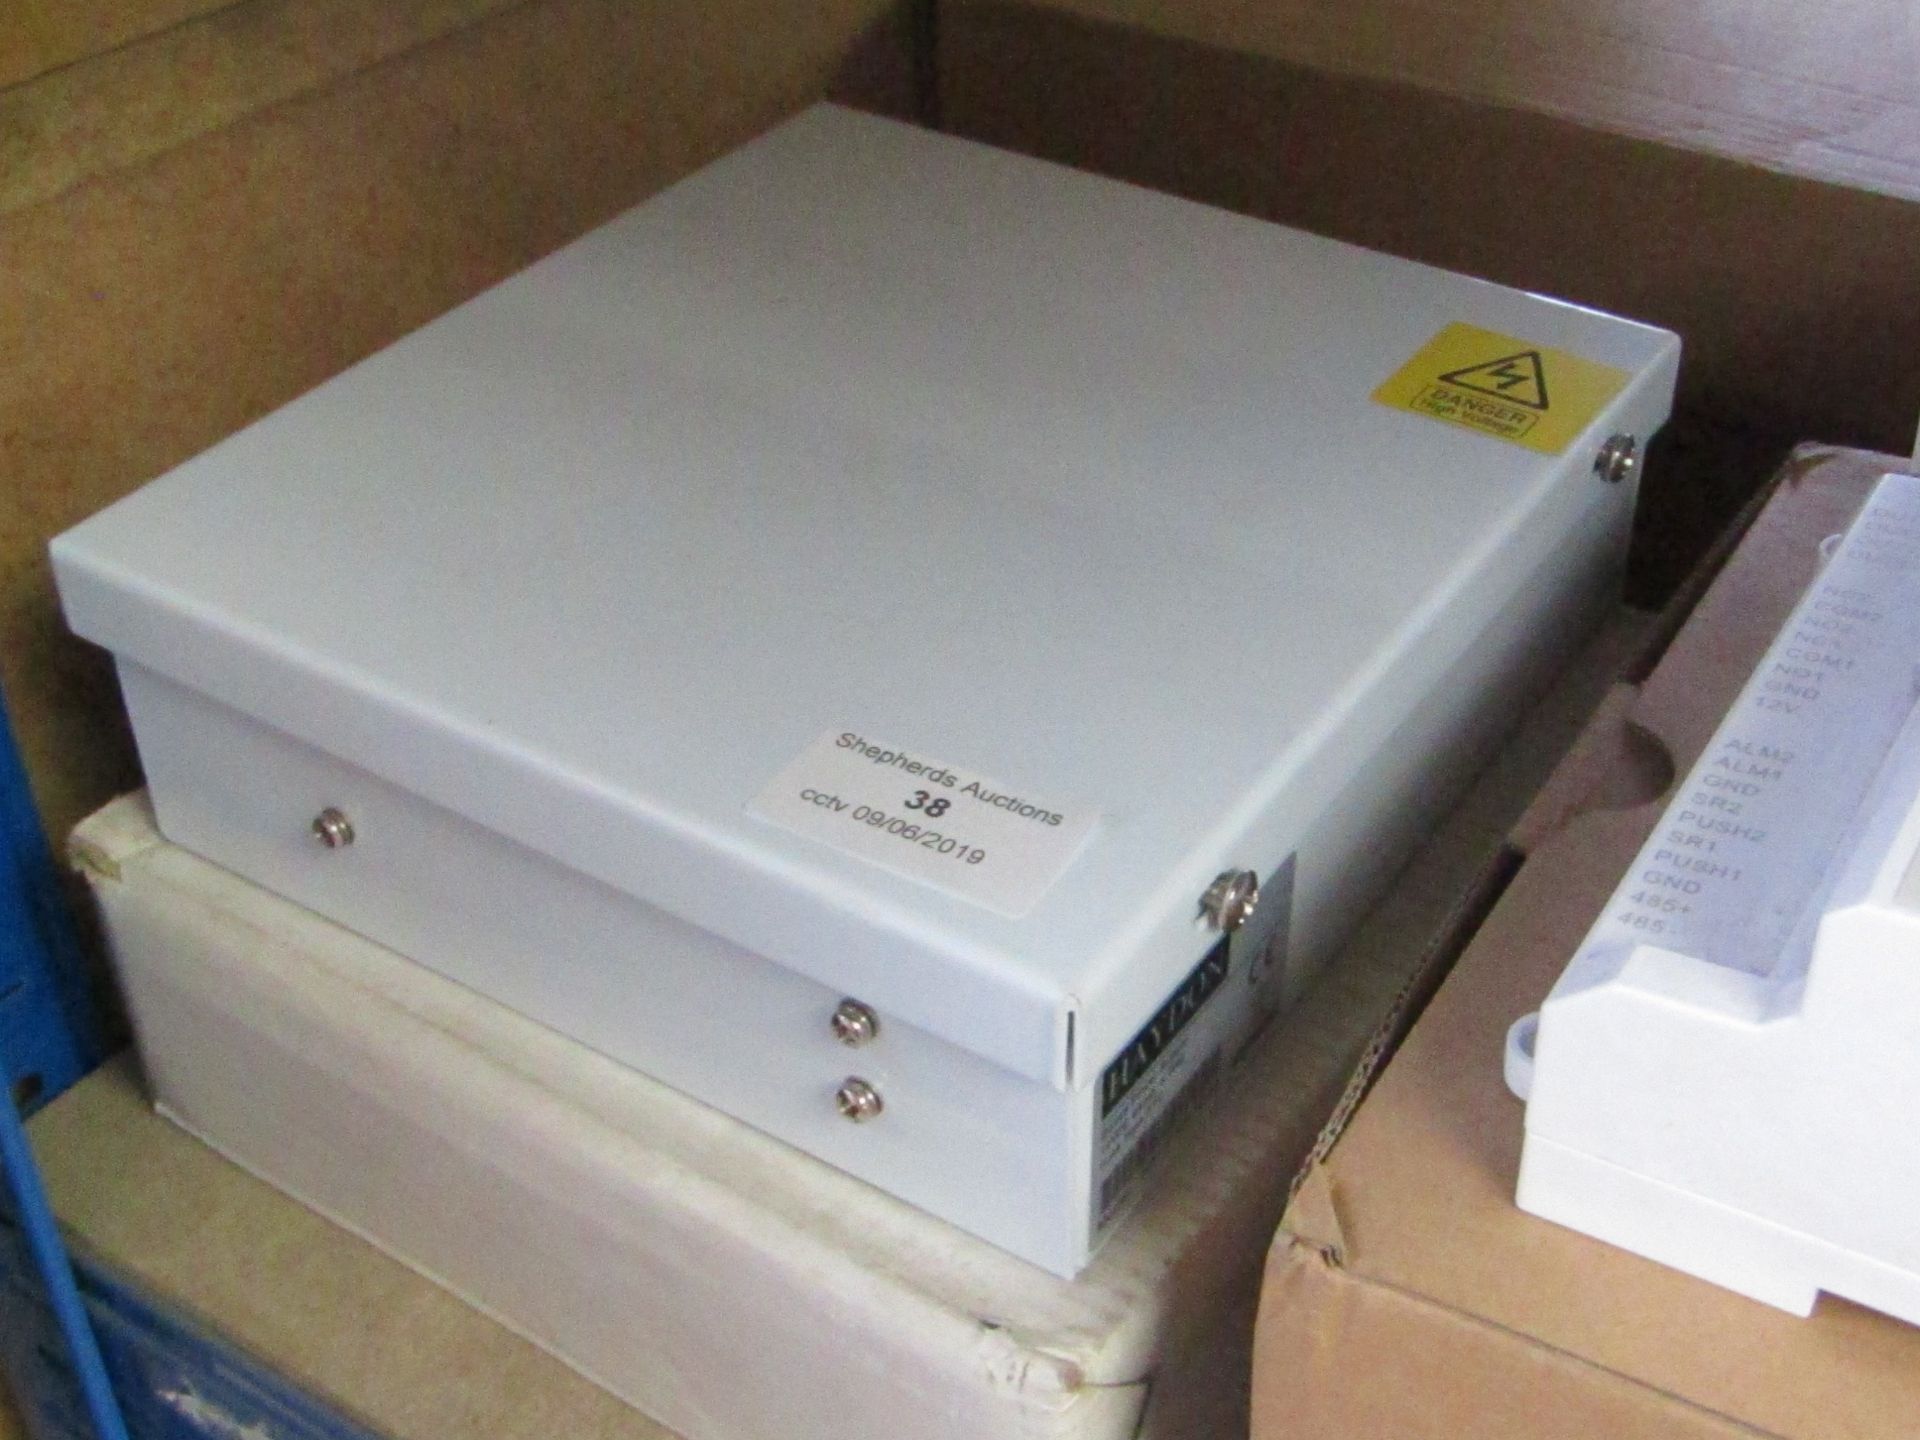 Haydon boxed power supply. Protective box that also powers DC12v cameras.